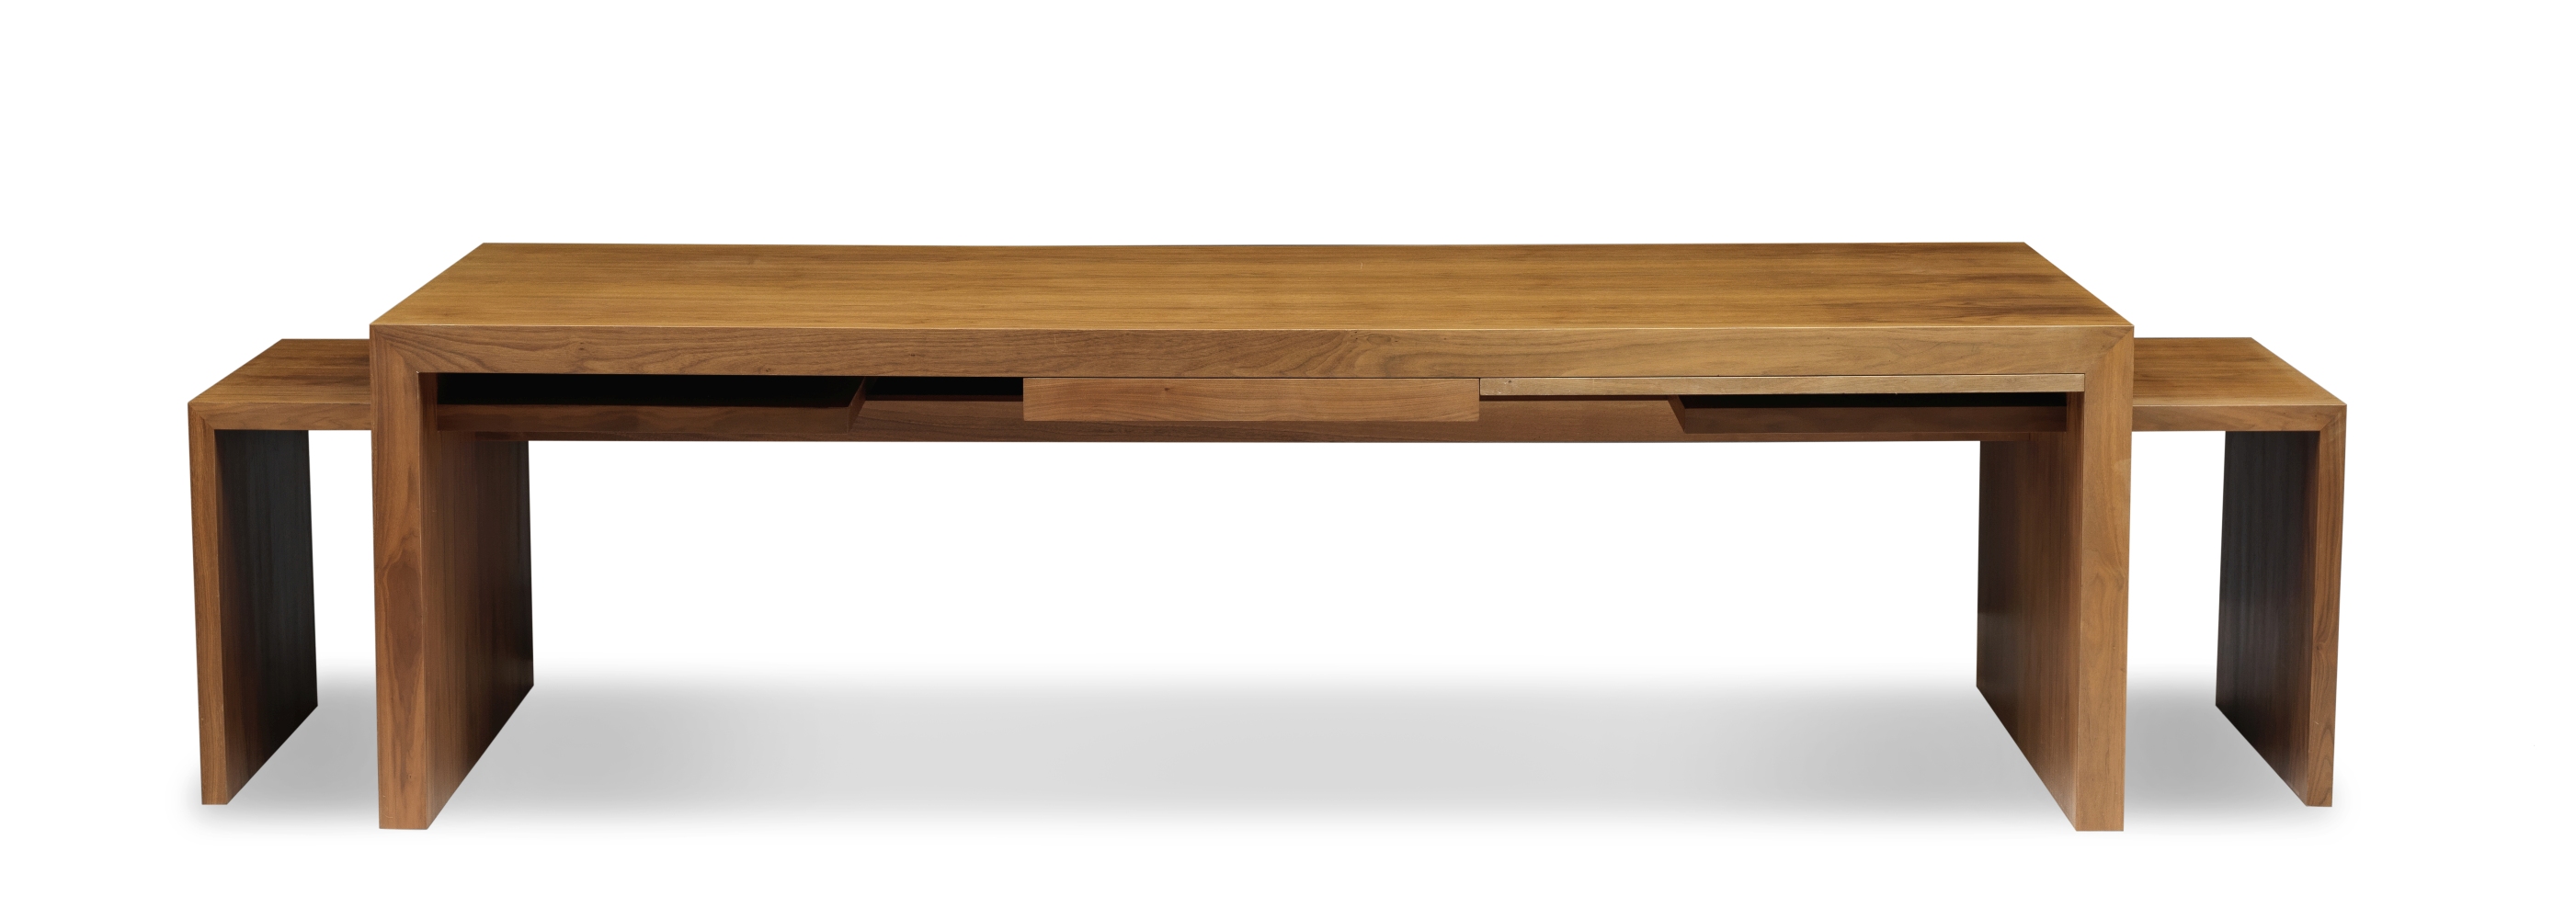 Sir Terence Conran's desk Designed by Sir Terence Conran, made by Benchmark Furniture